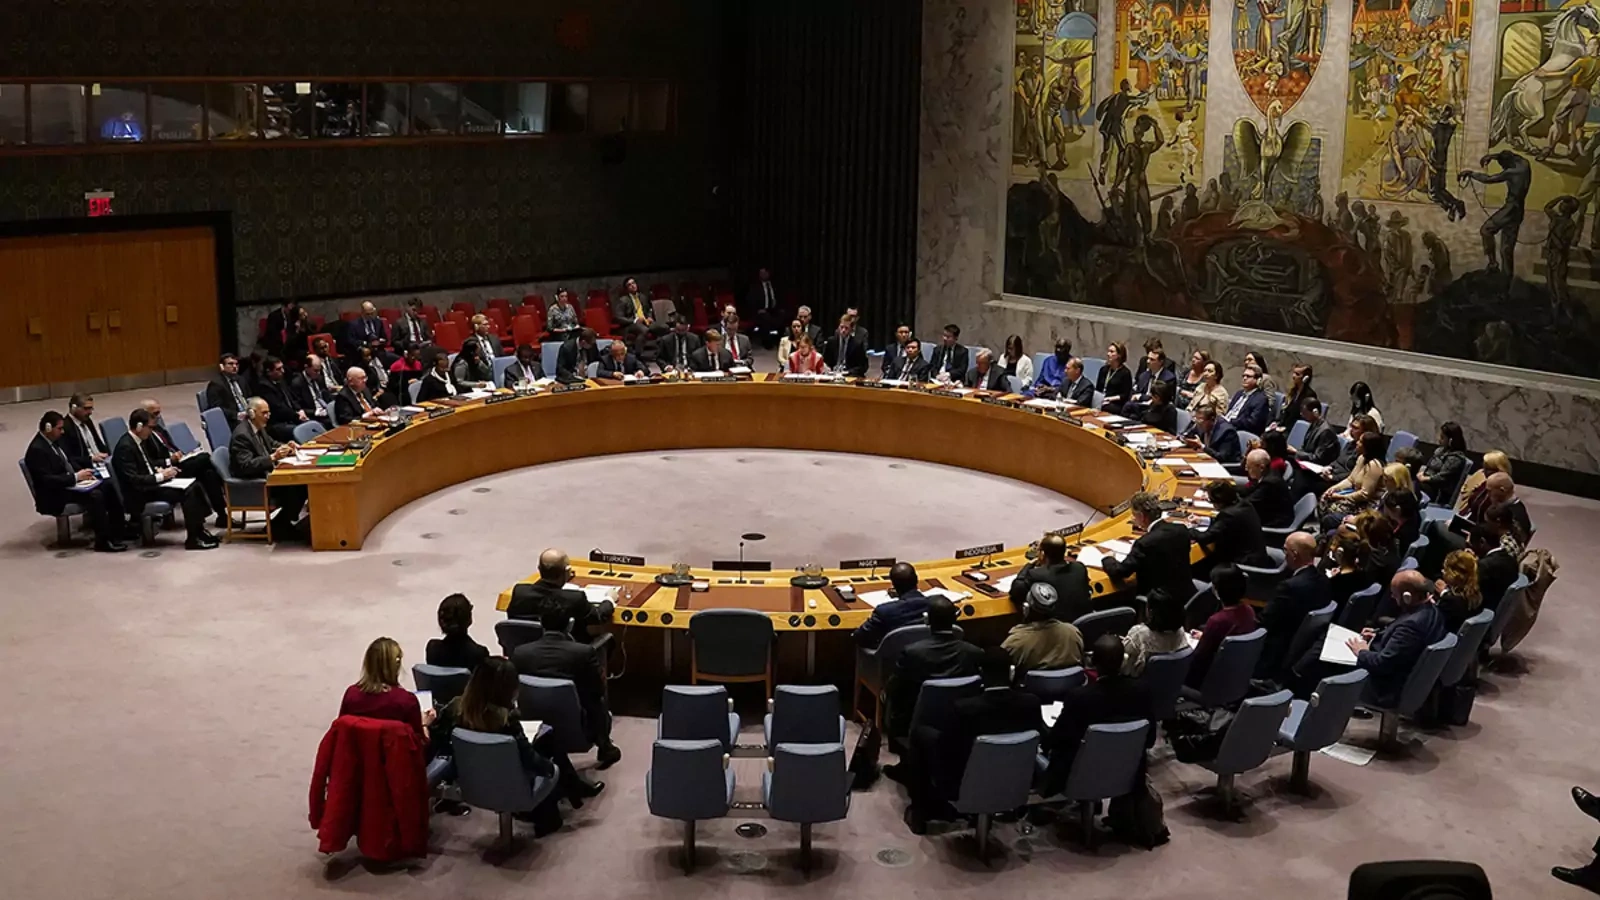 The United Nations Security Council meets to discuss the situation in Syria at its headquarters in New York City.